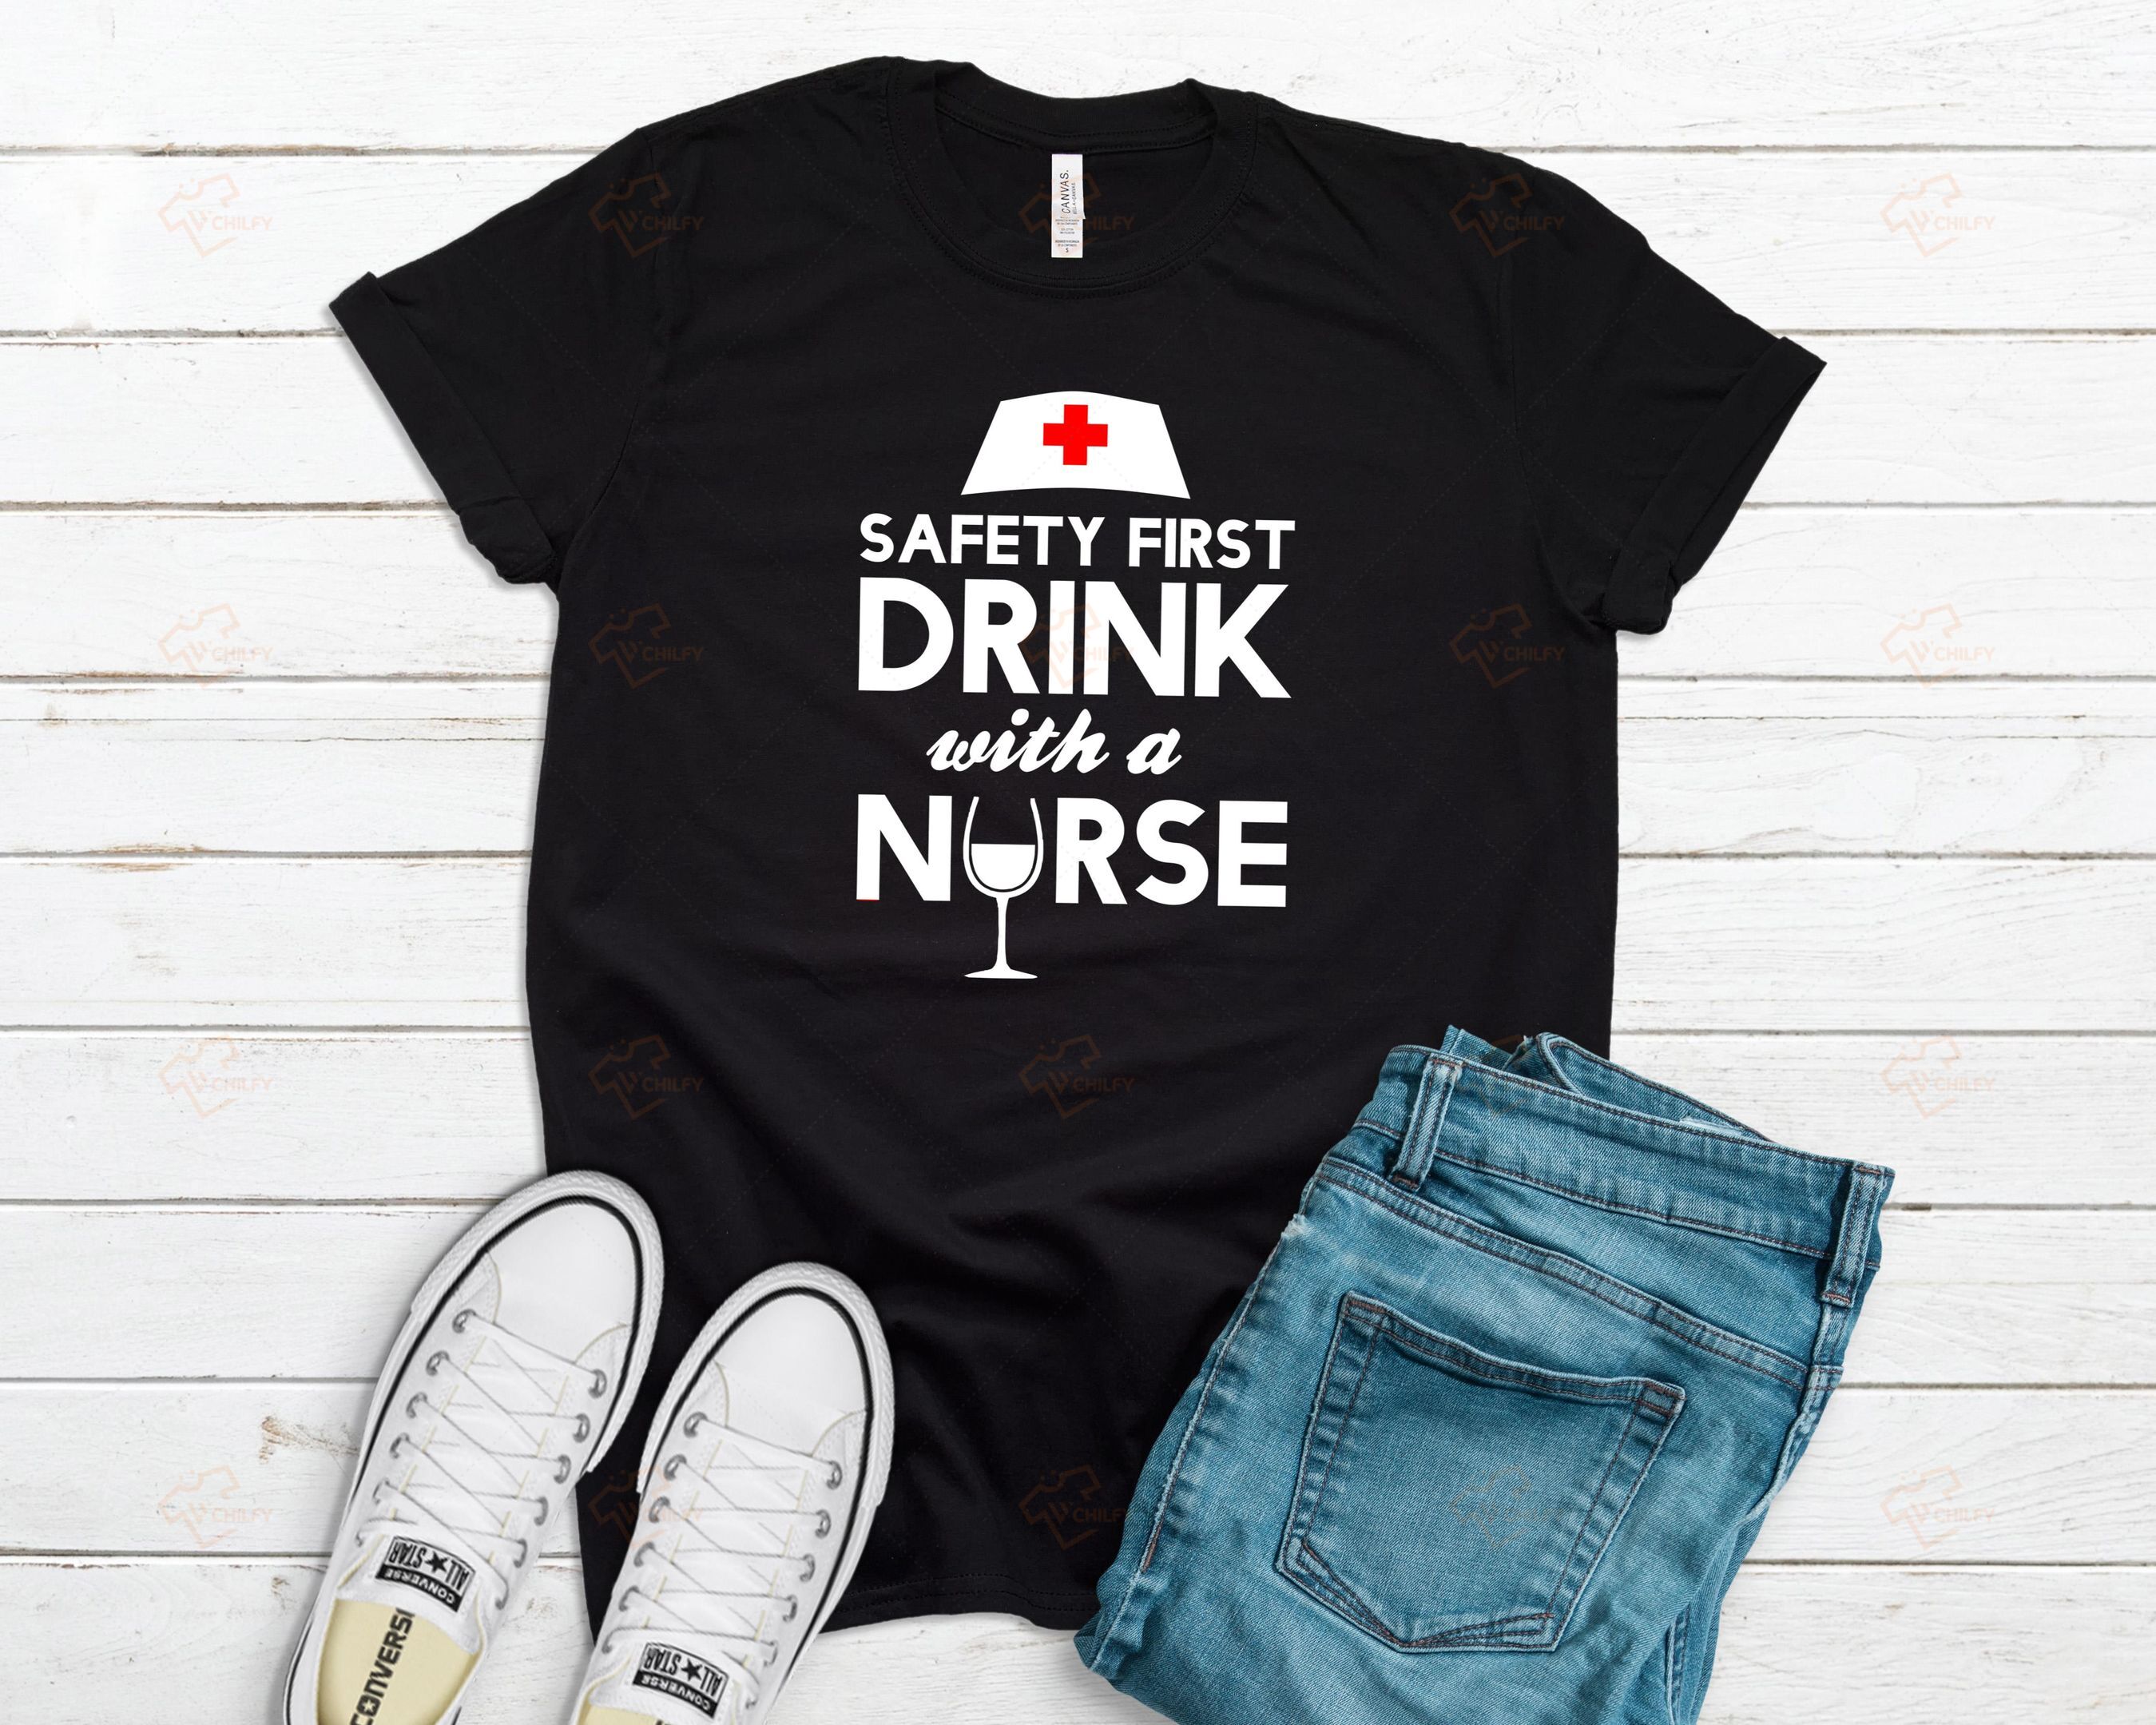 Safety First Drink With A Nurse T-shirt, Funny Nurse Shirt, Gift For Nurse, Nurse Gift, RN Shirt